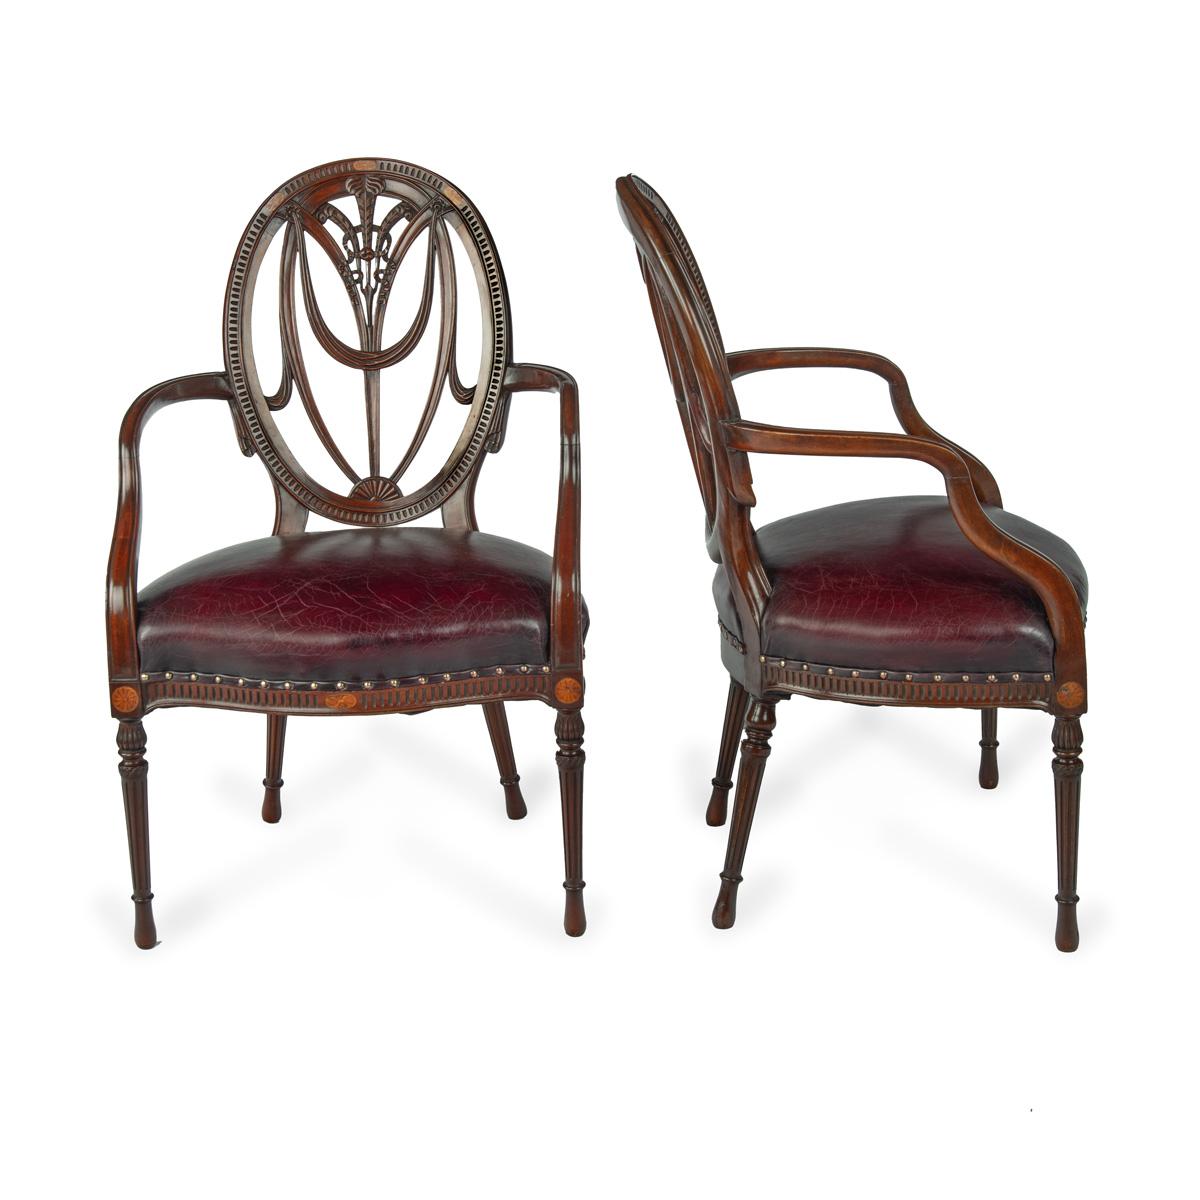 A pair mahogany Hepplewhite style arm chairs, each with an oval back enclosing Prince of Wales feathers with draperies and tied ribbons, the shaped arms and serpentine seat set upon turned, tapering and fluted legs, decorated with inlaid round and